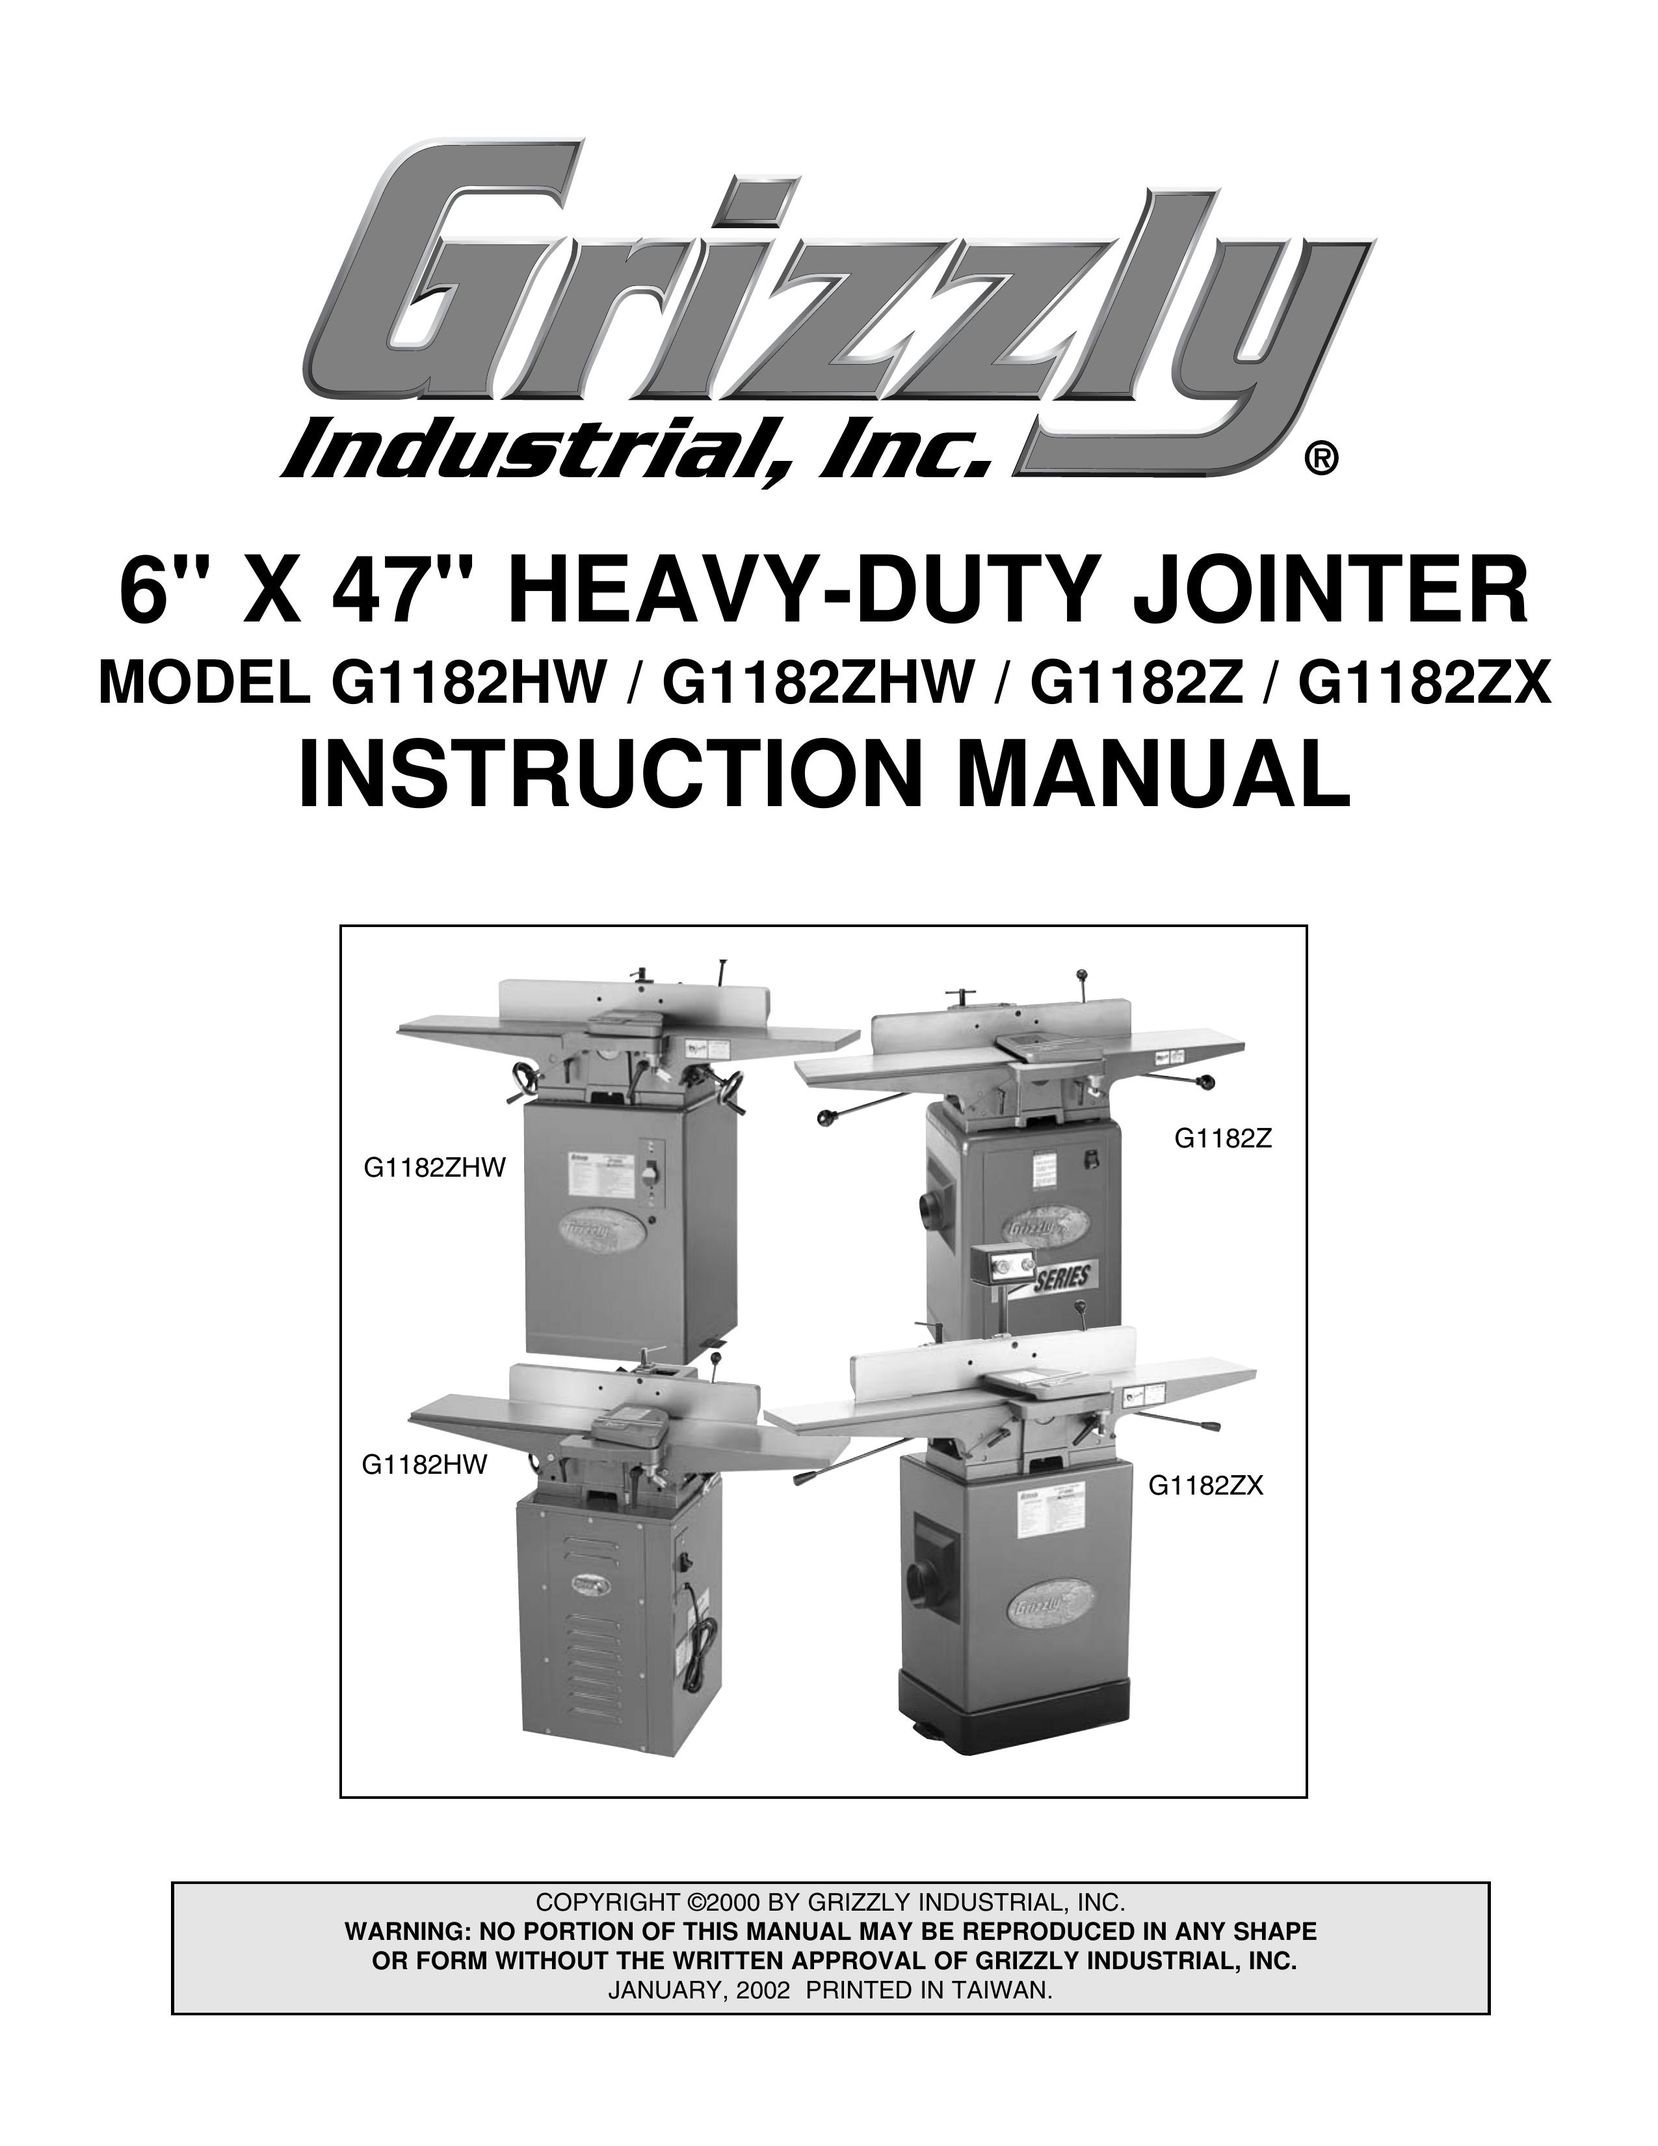 Grizzly G1182ZX Biscuit Joiner User Manual